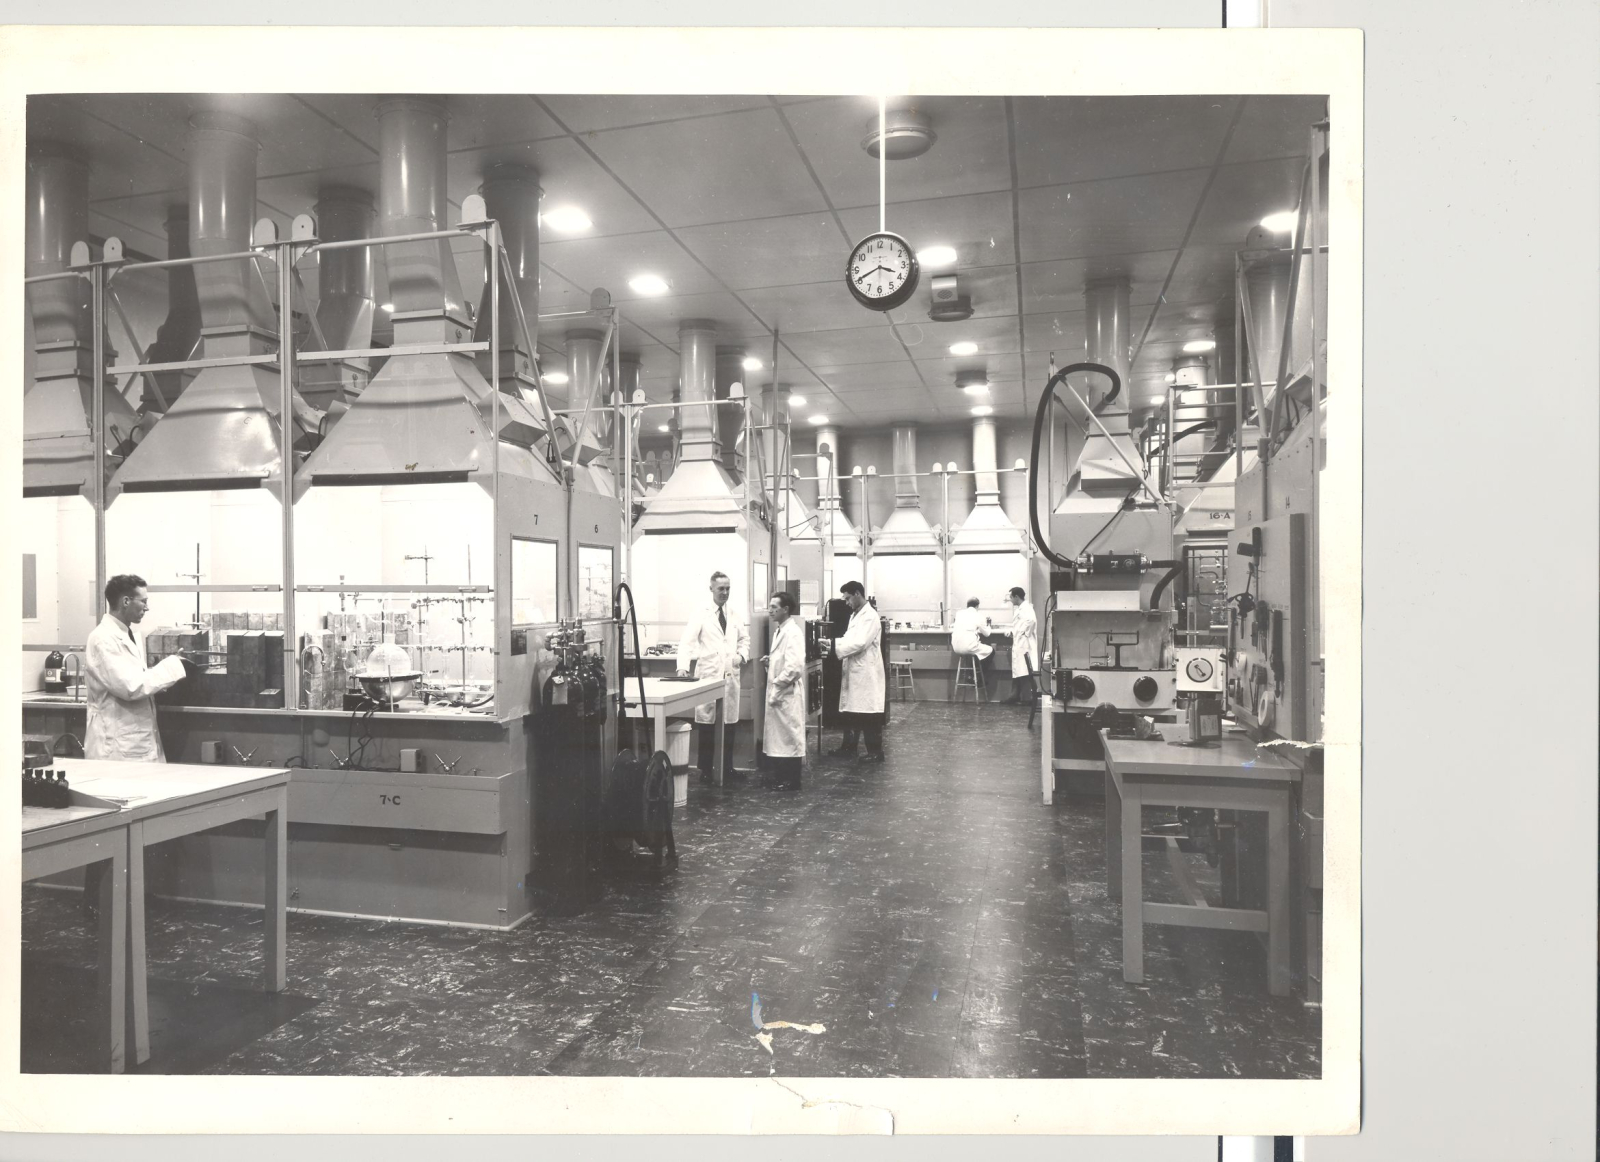 A black and white photo showing the labs where medical isotopes were produced at Chalk River from the pre-2000s